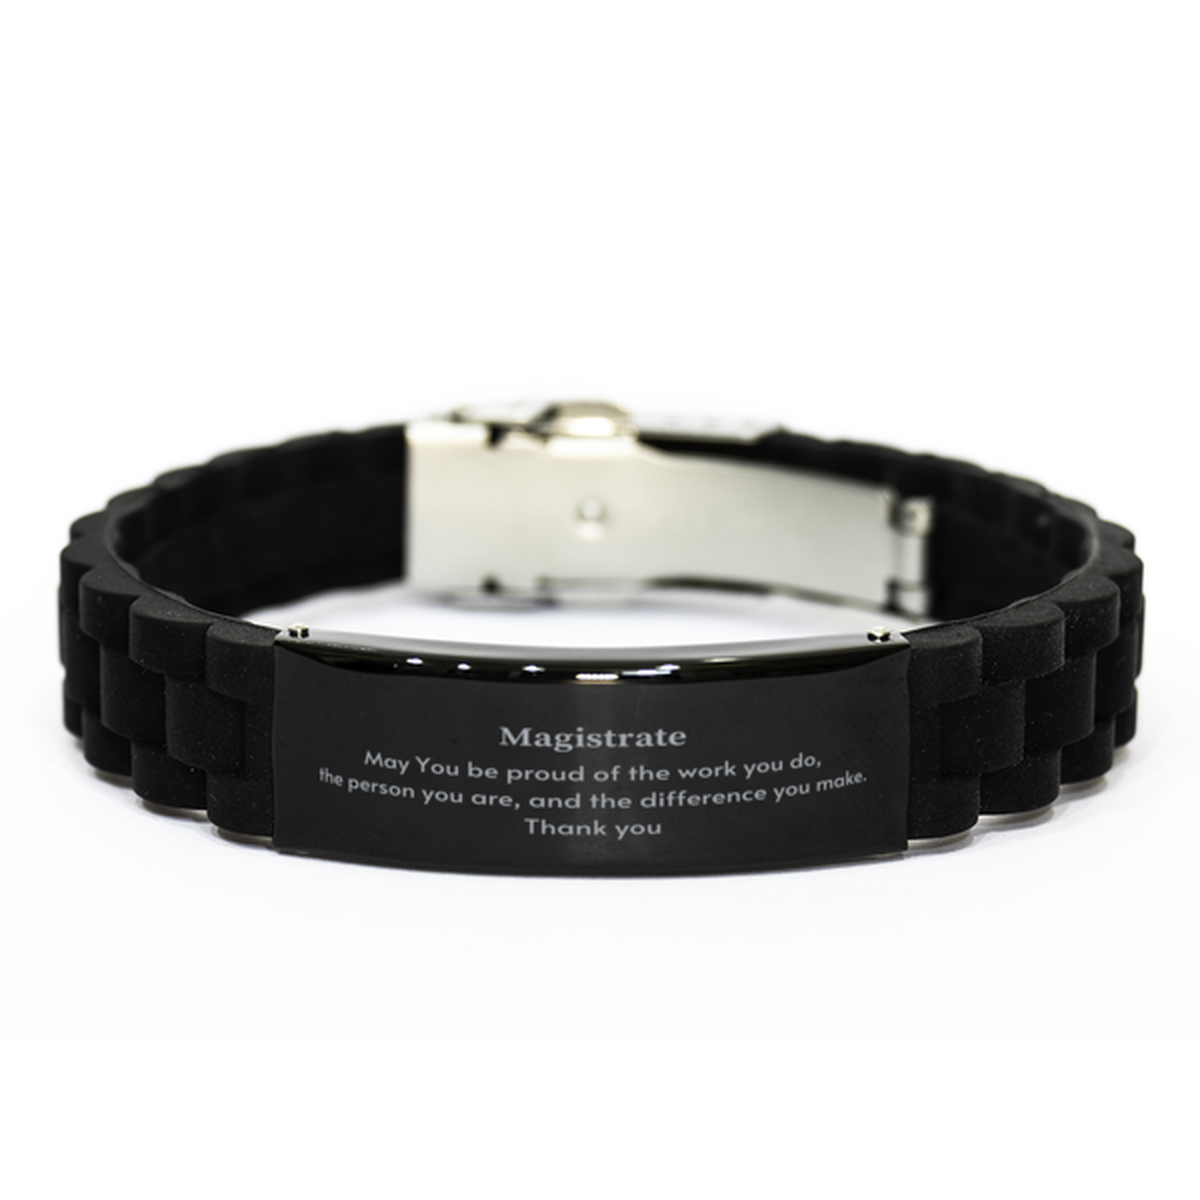 Heartwarming Black Glidelock Clasp Bracelet Retirement Coworkers Gifts for Magistrate, Magistrate May You be proud of the work you do, the person you are Gifts for Boss Men Women Friends